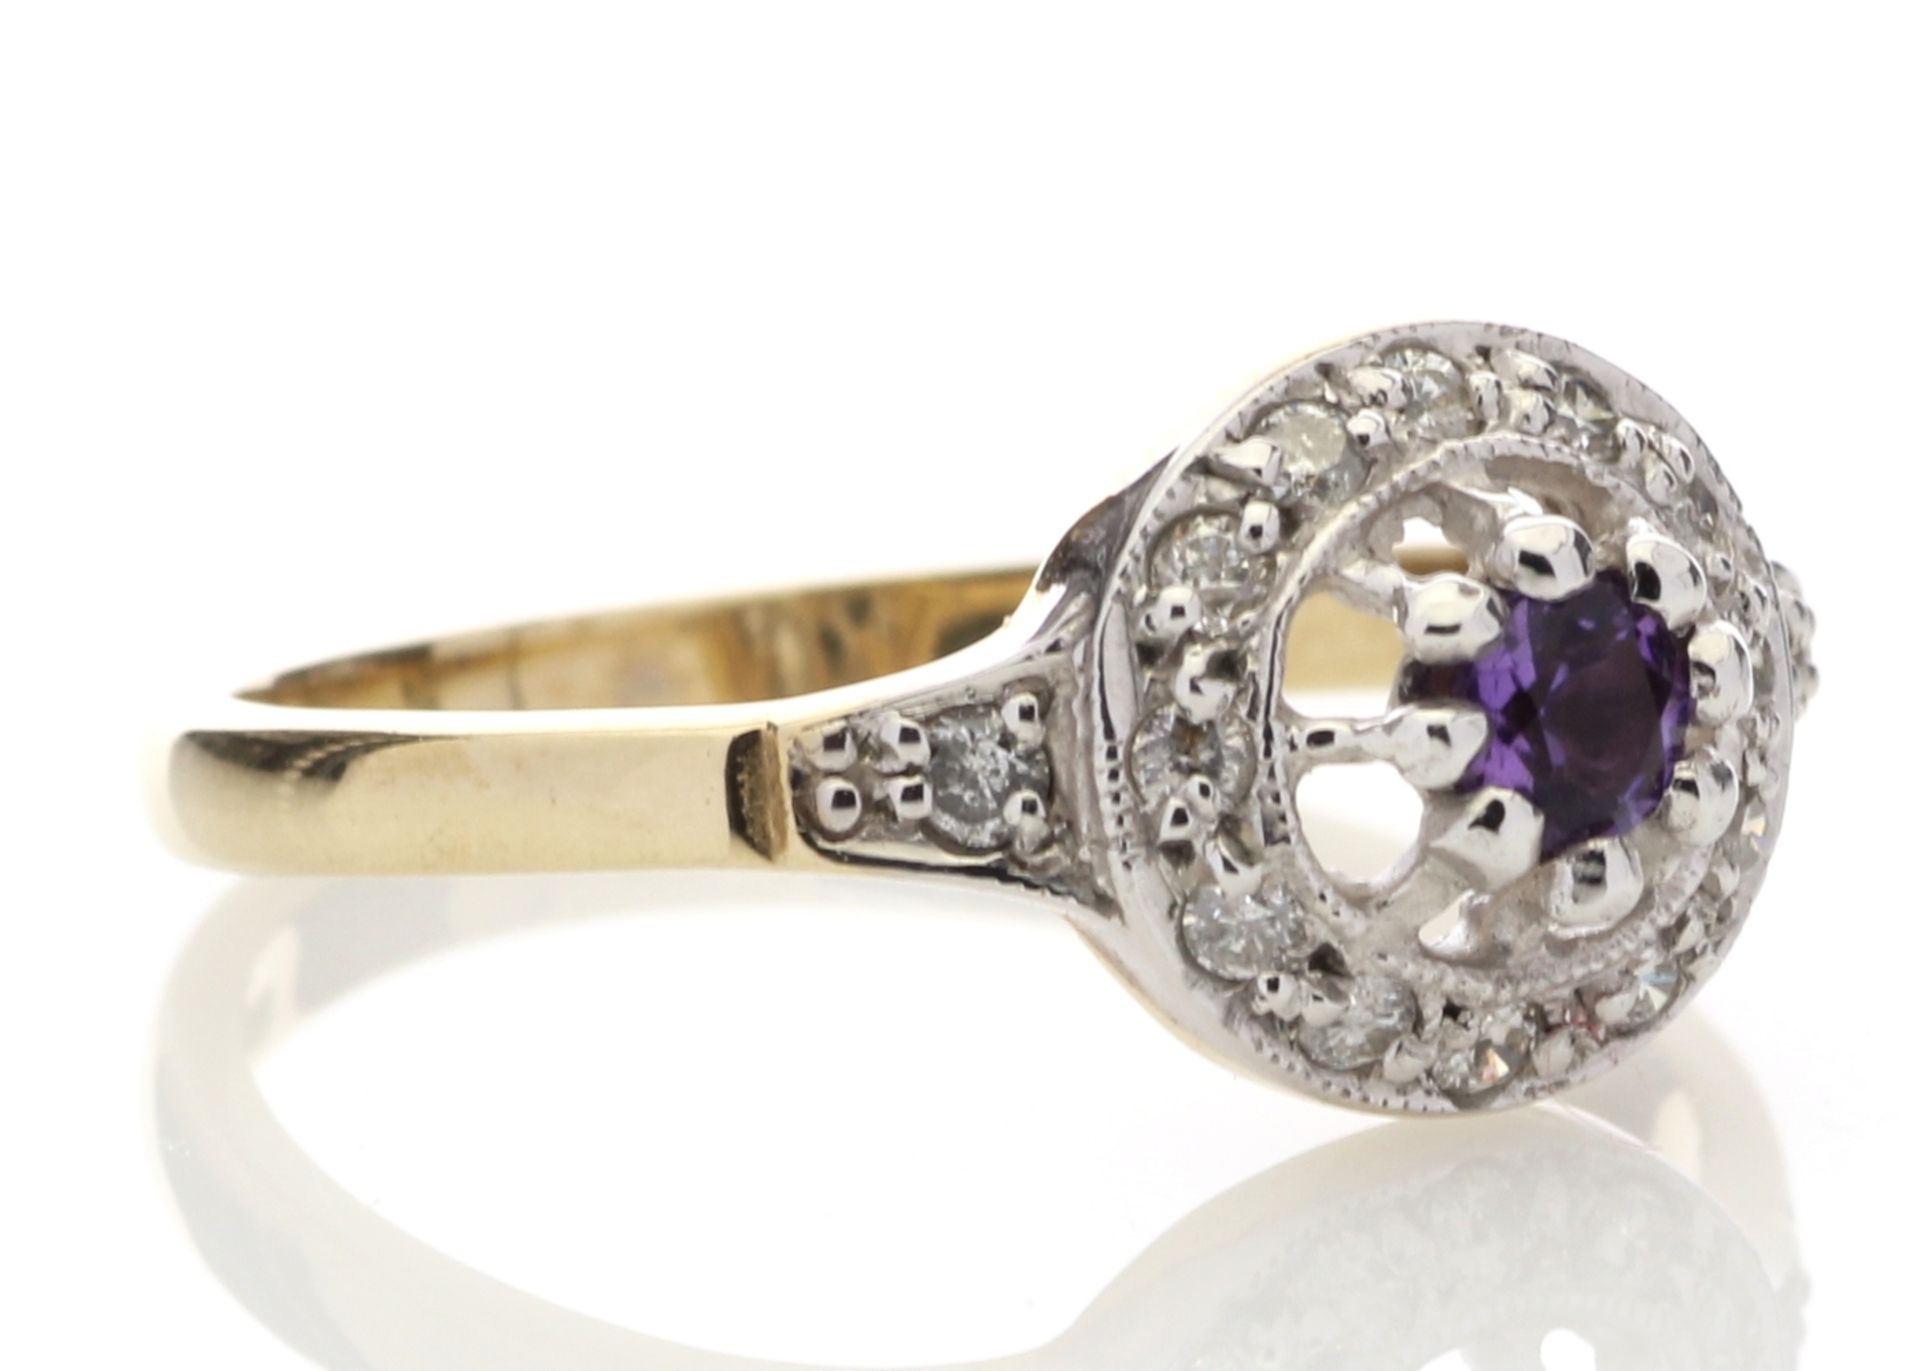 9ct Yellow Gold Round Cluster Claw Set Diamond Amethyst Ring 0.21 Carats - Valued by AGI £1,053.00 - - Image 4 of 4